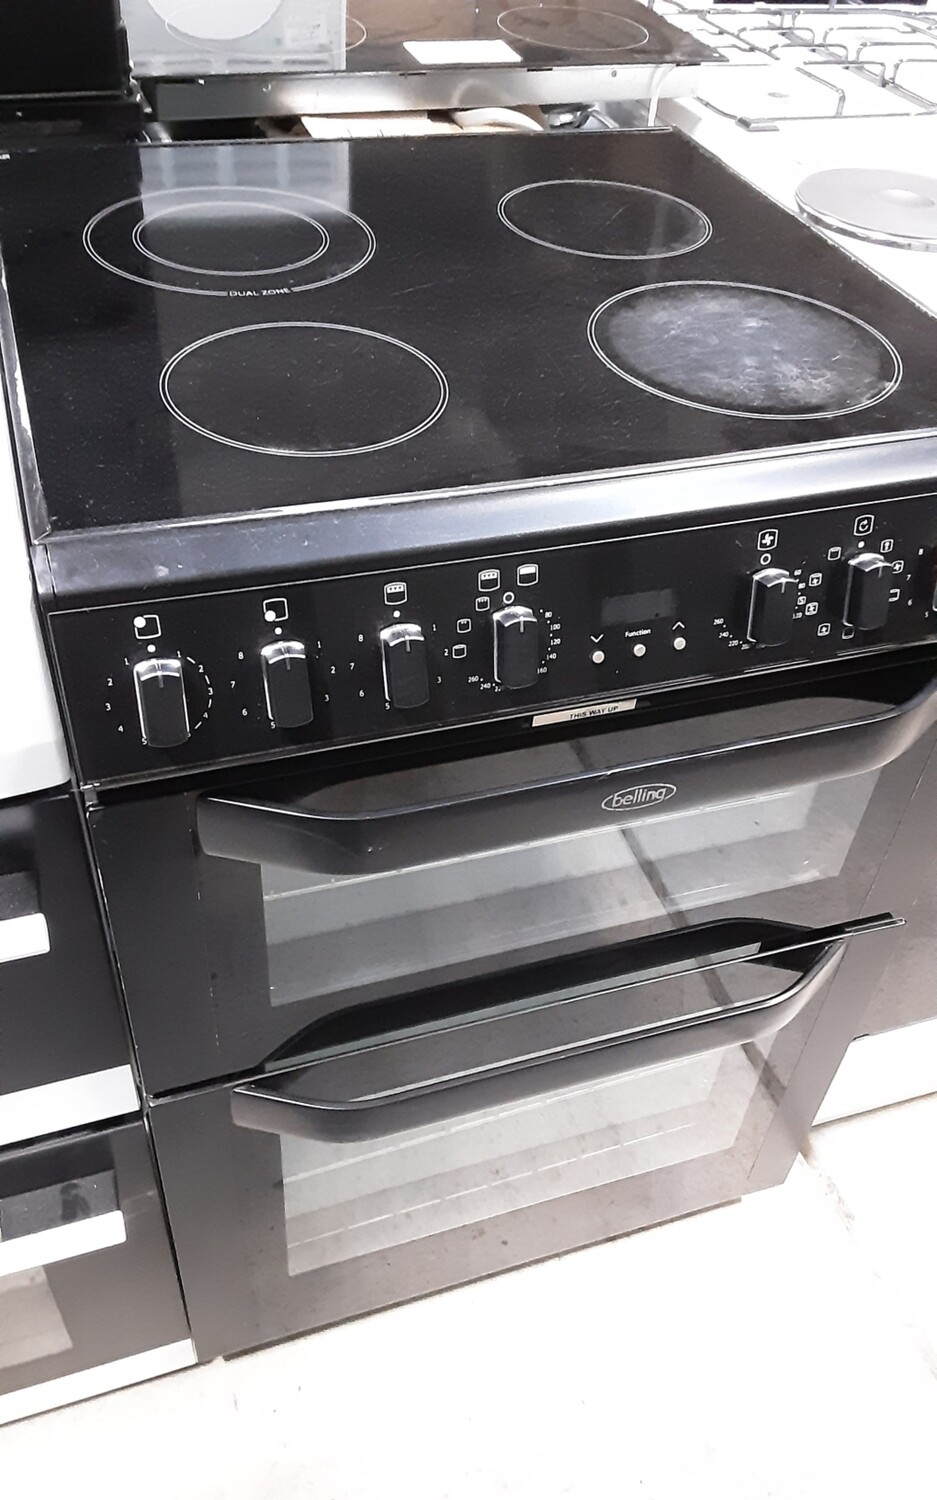 Belling 60cm Electric Cooker Fan oven with Ceramic Hob - Black - Refurbished 6 Month Guarantee 